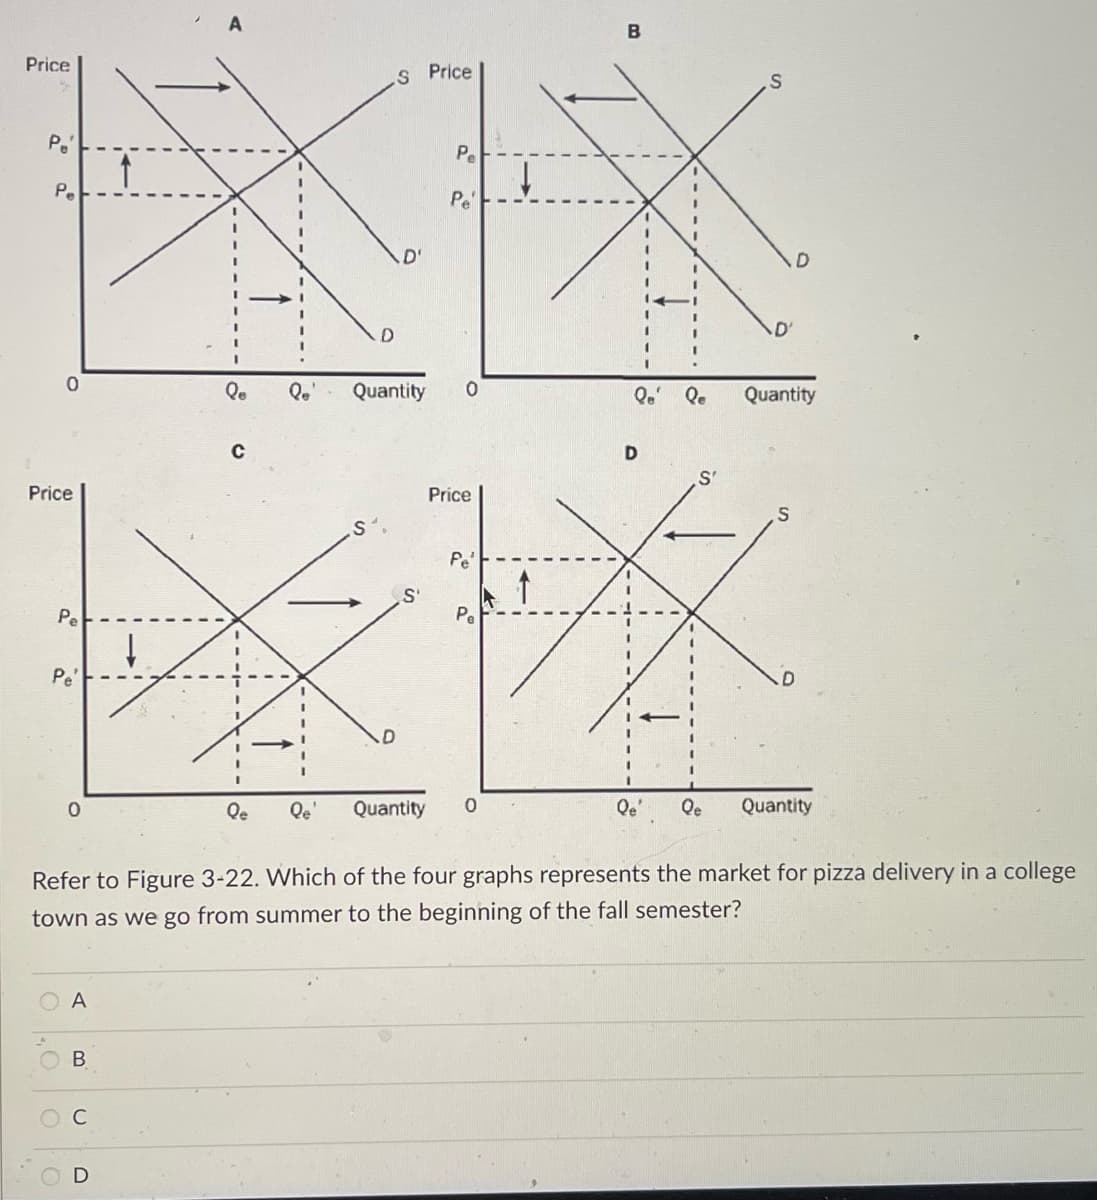 Price
Pe
S Price
Pe
Pe
XX
.D'
D
Qe Qo' Quantity 0
Pe
0
Price
Pe
Pe'
0
A
B
C
U
I
S
D
S
Qe Qe' Quantity
Price
Pe
B
Pe
Qe Qe
D
S'
D
Quantity
S
Refer to Figure 3-22. Which of the four graphs represents the market for pizza delivery in a college
town as we go from summer to the beginning of the fall semester?
Qe' Qe Quantity